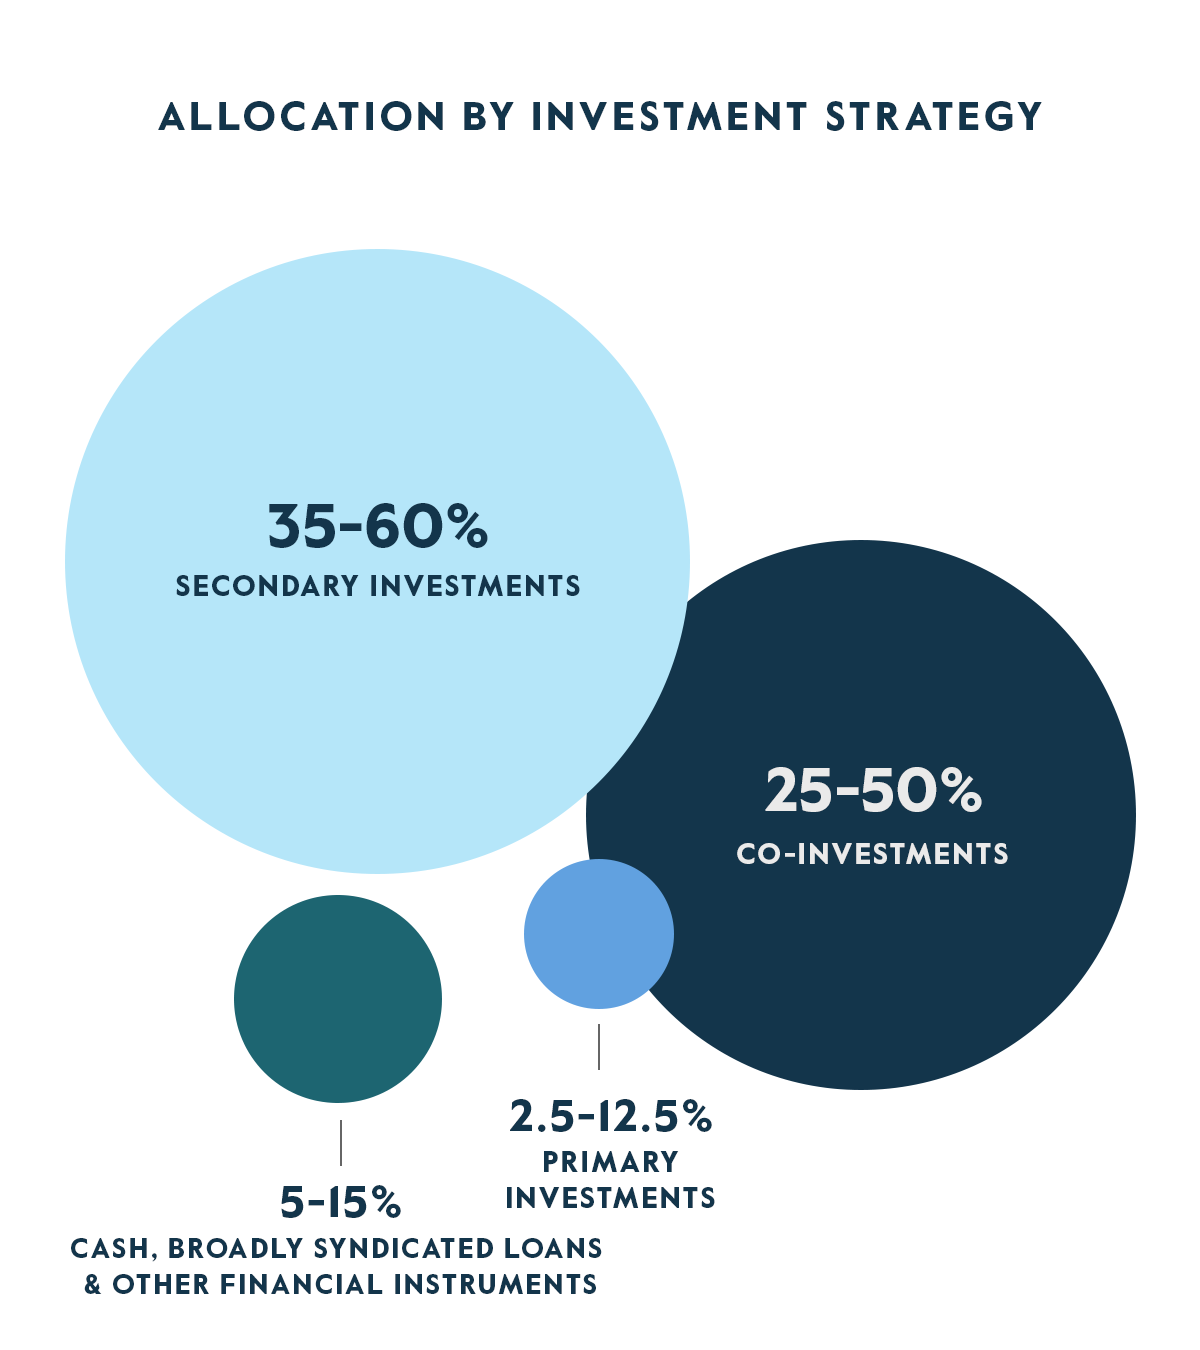 CAPM SICAV Allocation by Investment Strategy